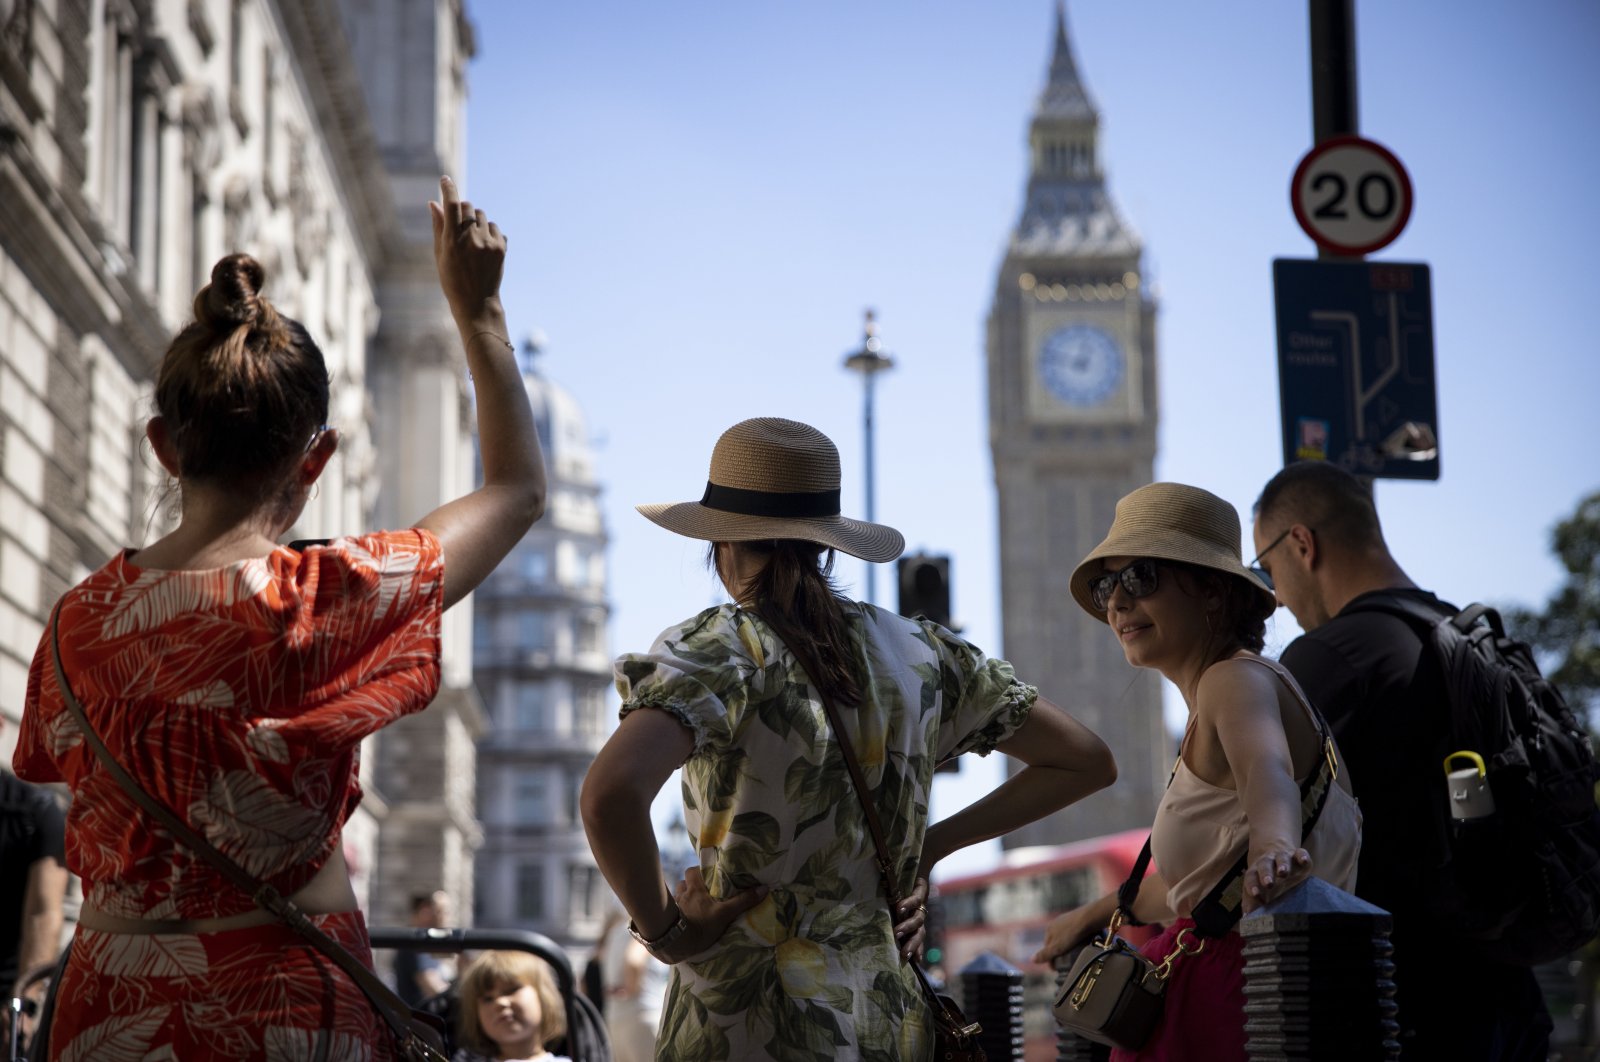 People wear hats as a precaution against the hot weather in Westminster, London, U.K., Aug. 11, 2022. (EPA Photo)